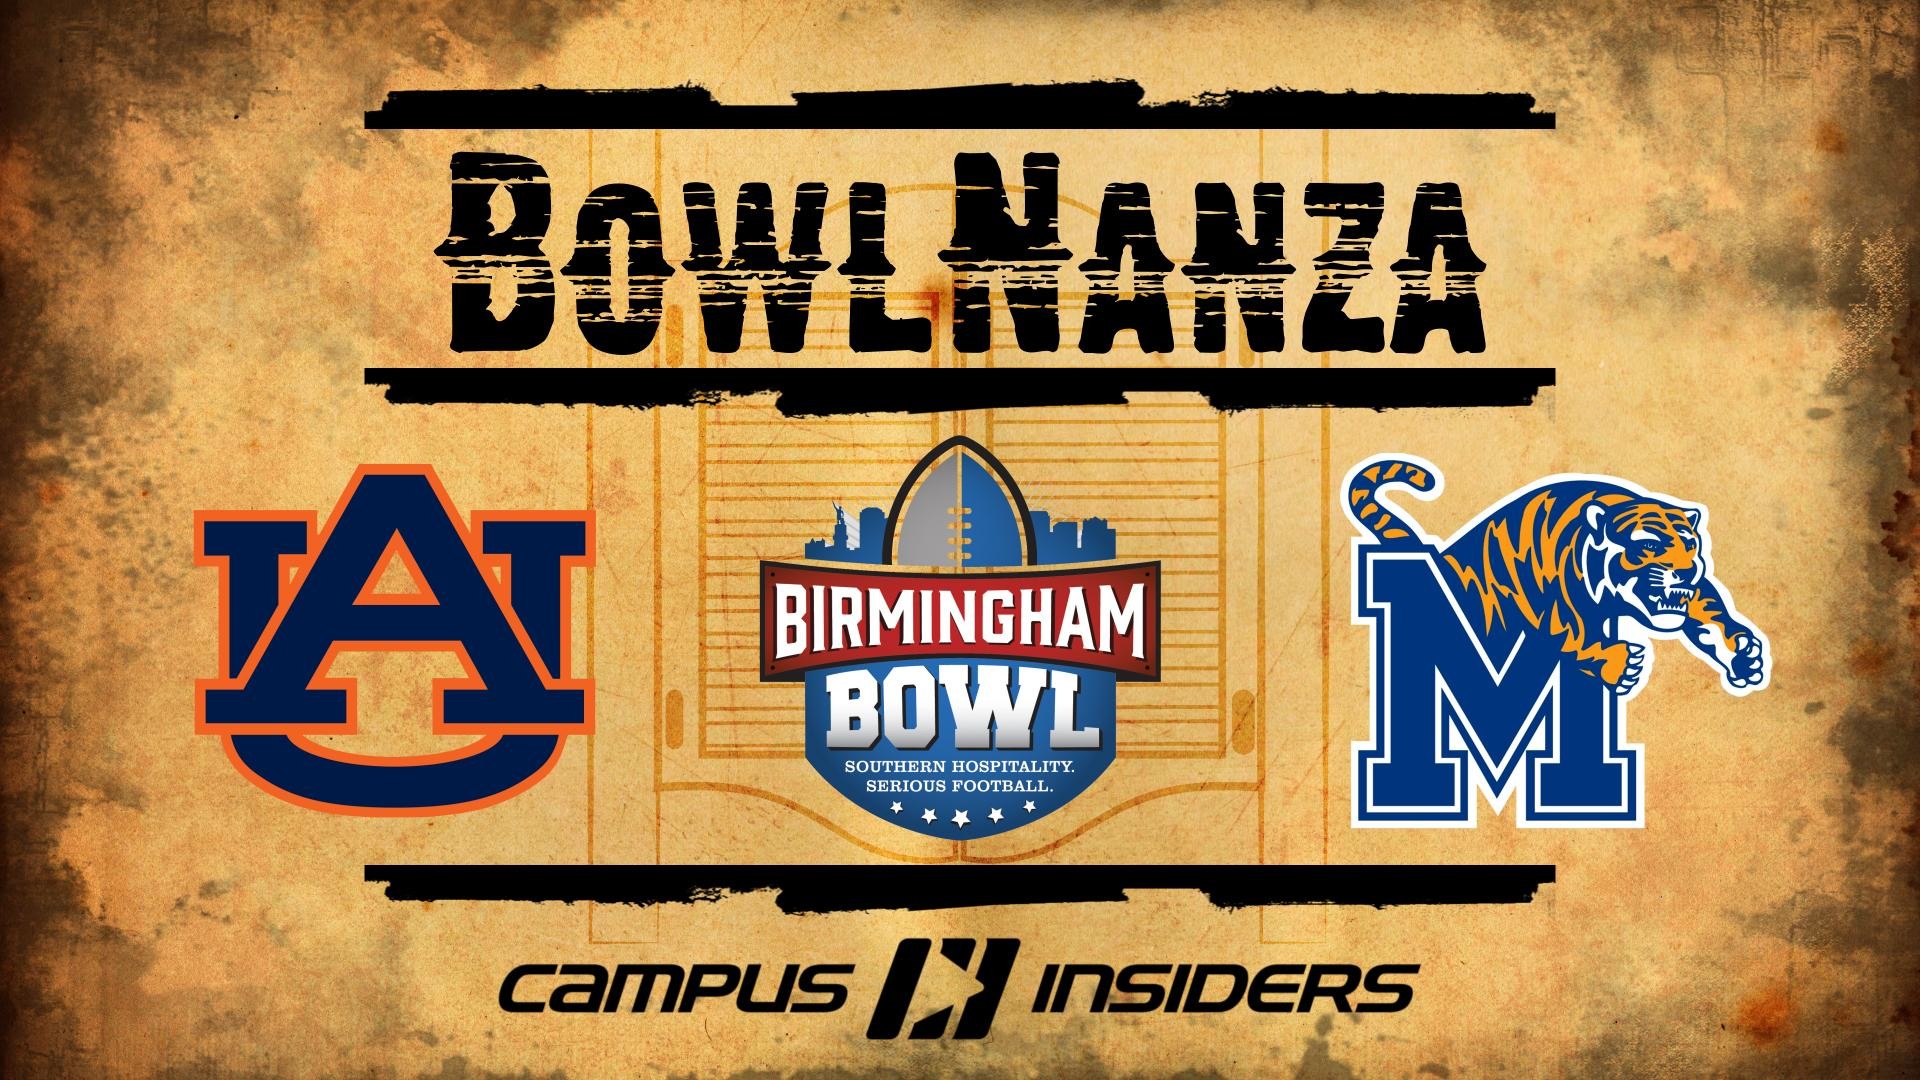 1920x1080 The Birmingham Bowl is hoping to break attendance records with the nearby  Auburn Tigers (6-6) and Memphis Tigers (9-3) playing at Legion Field.